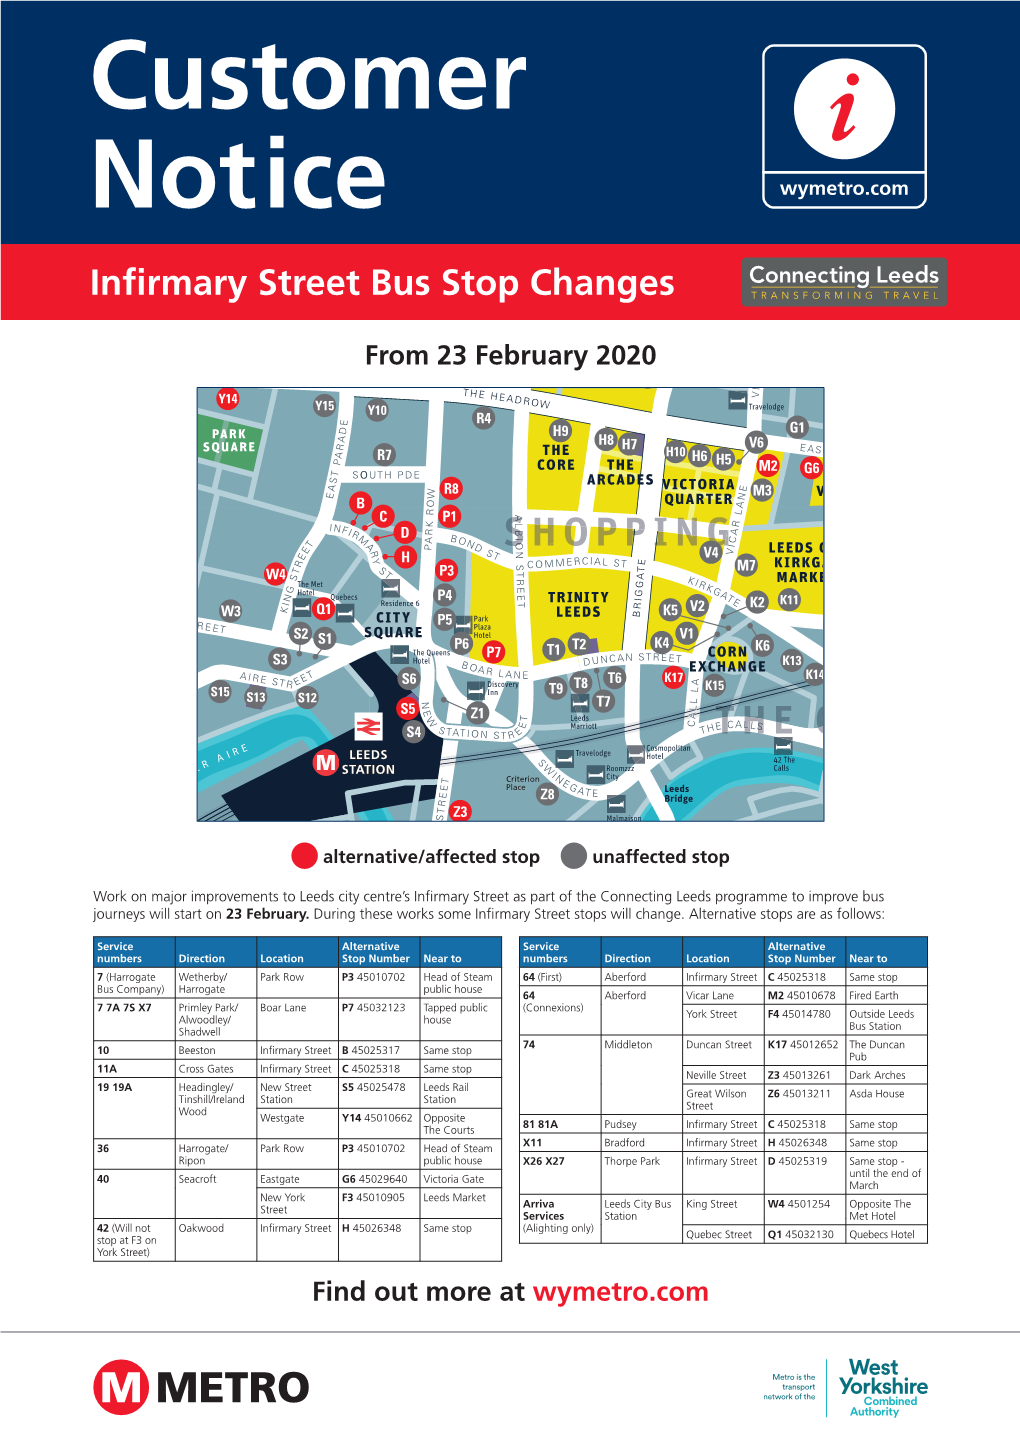 Infirmary Street Bus Stop Changes